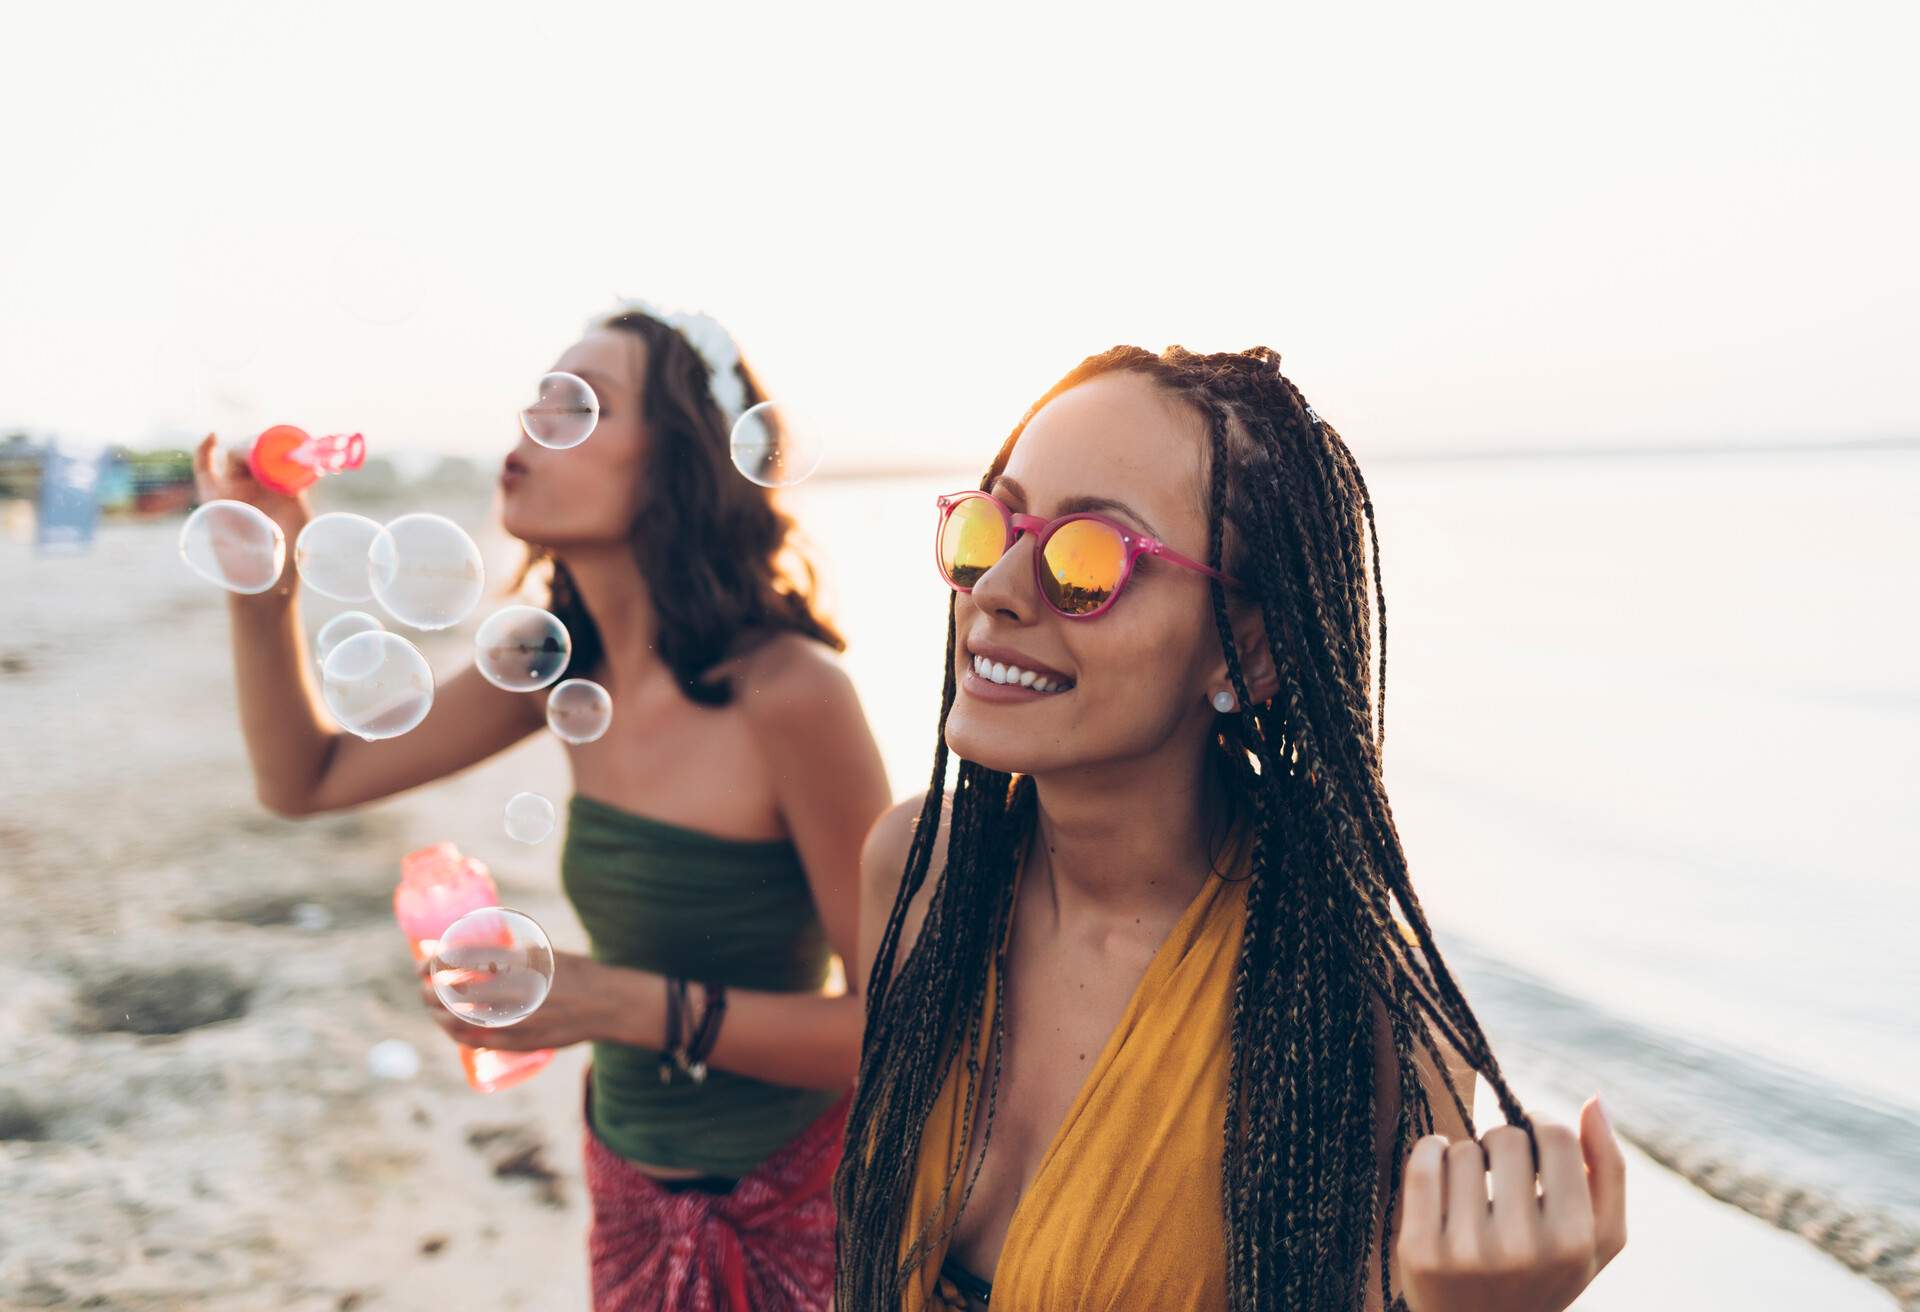 Young women on the beach, radiating joy and laughter, playfully blow bubbles.